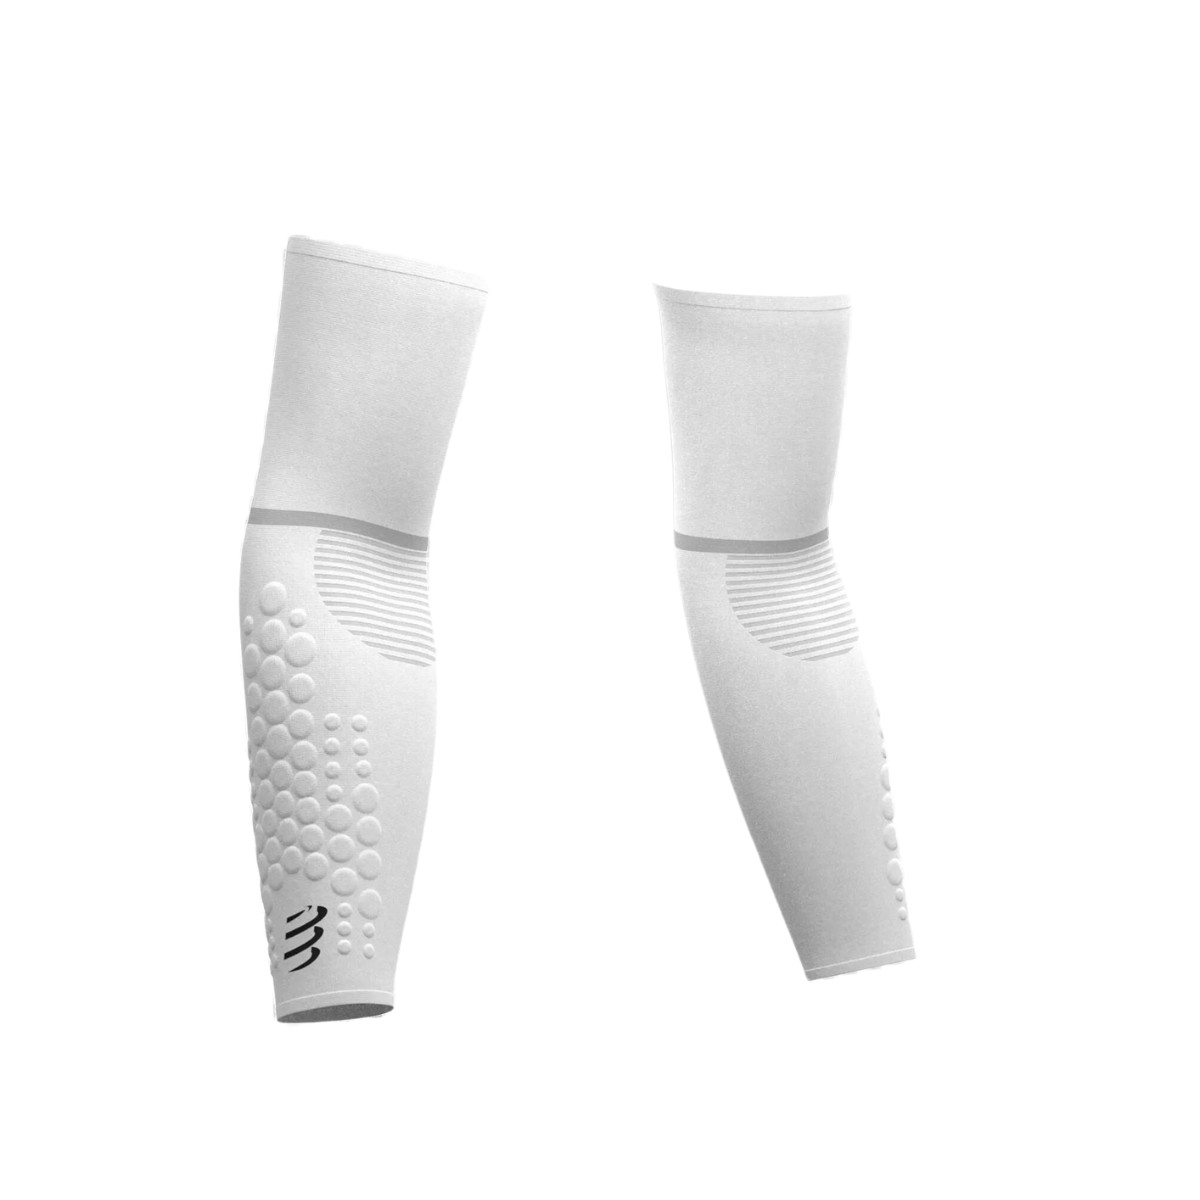 Manchons de Compression Compressport Arm Force Ultralight Blanc, Taille Taille 4 product